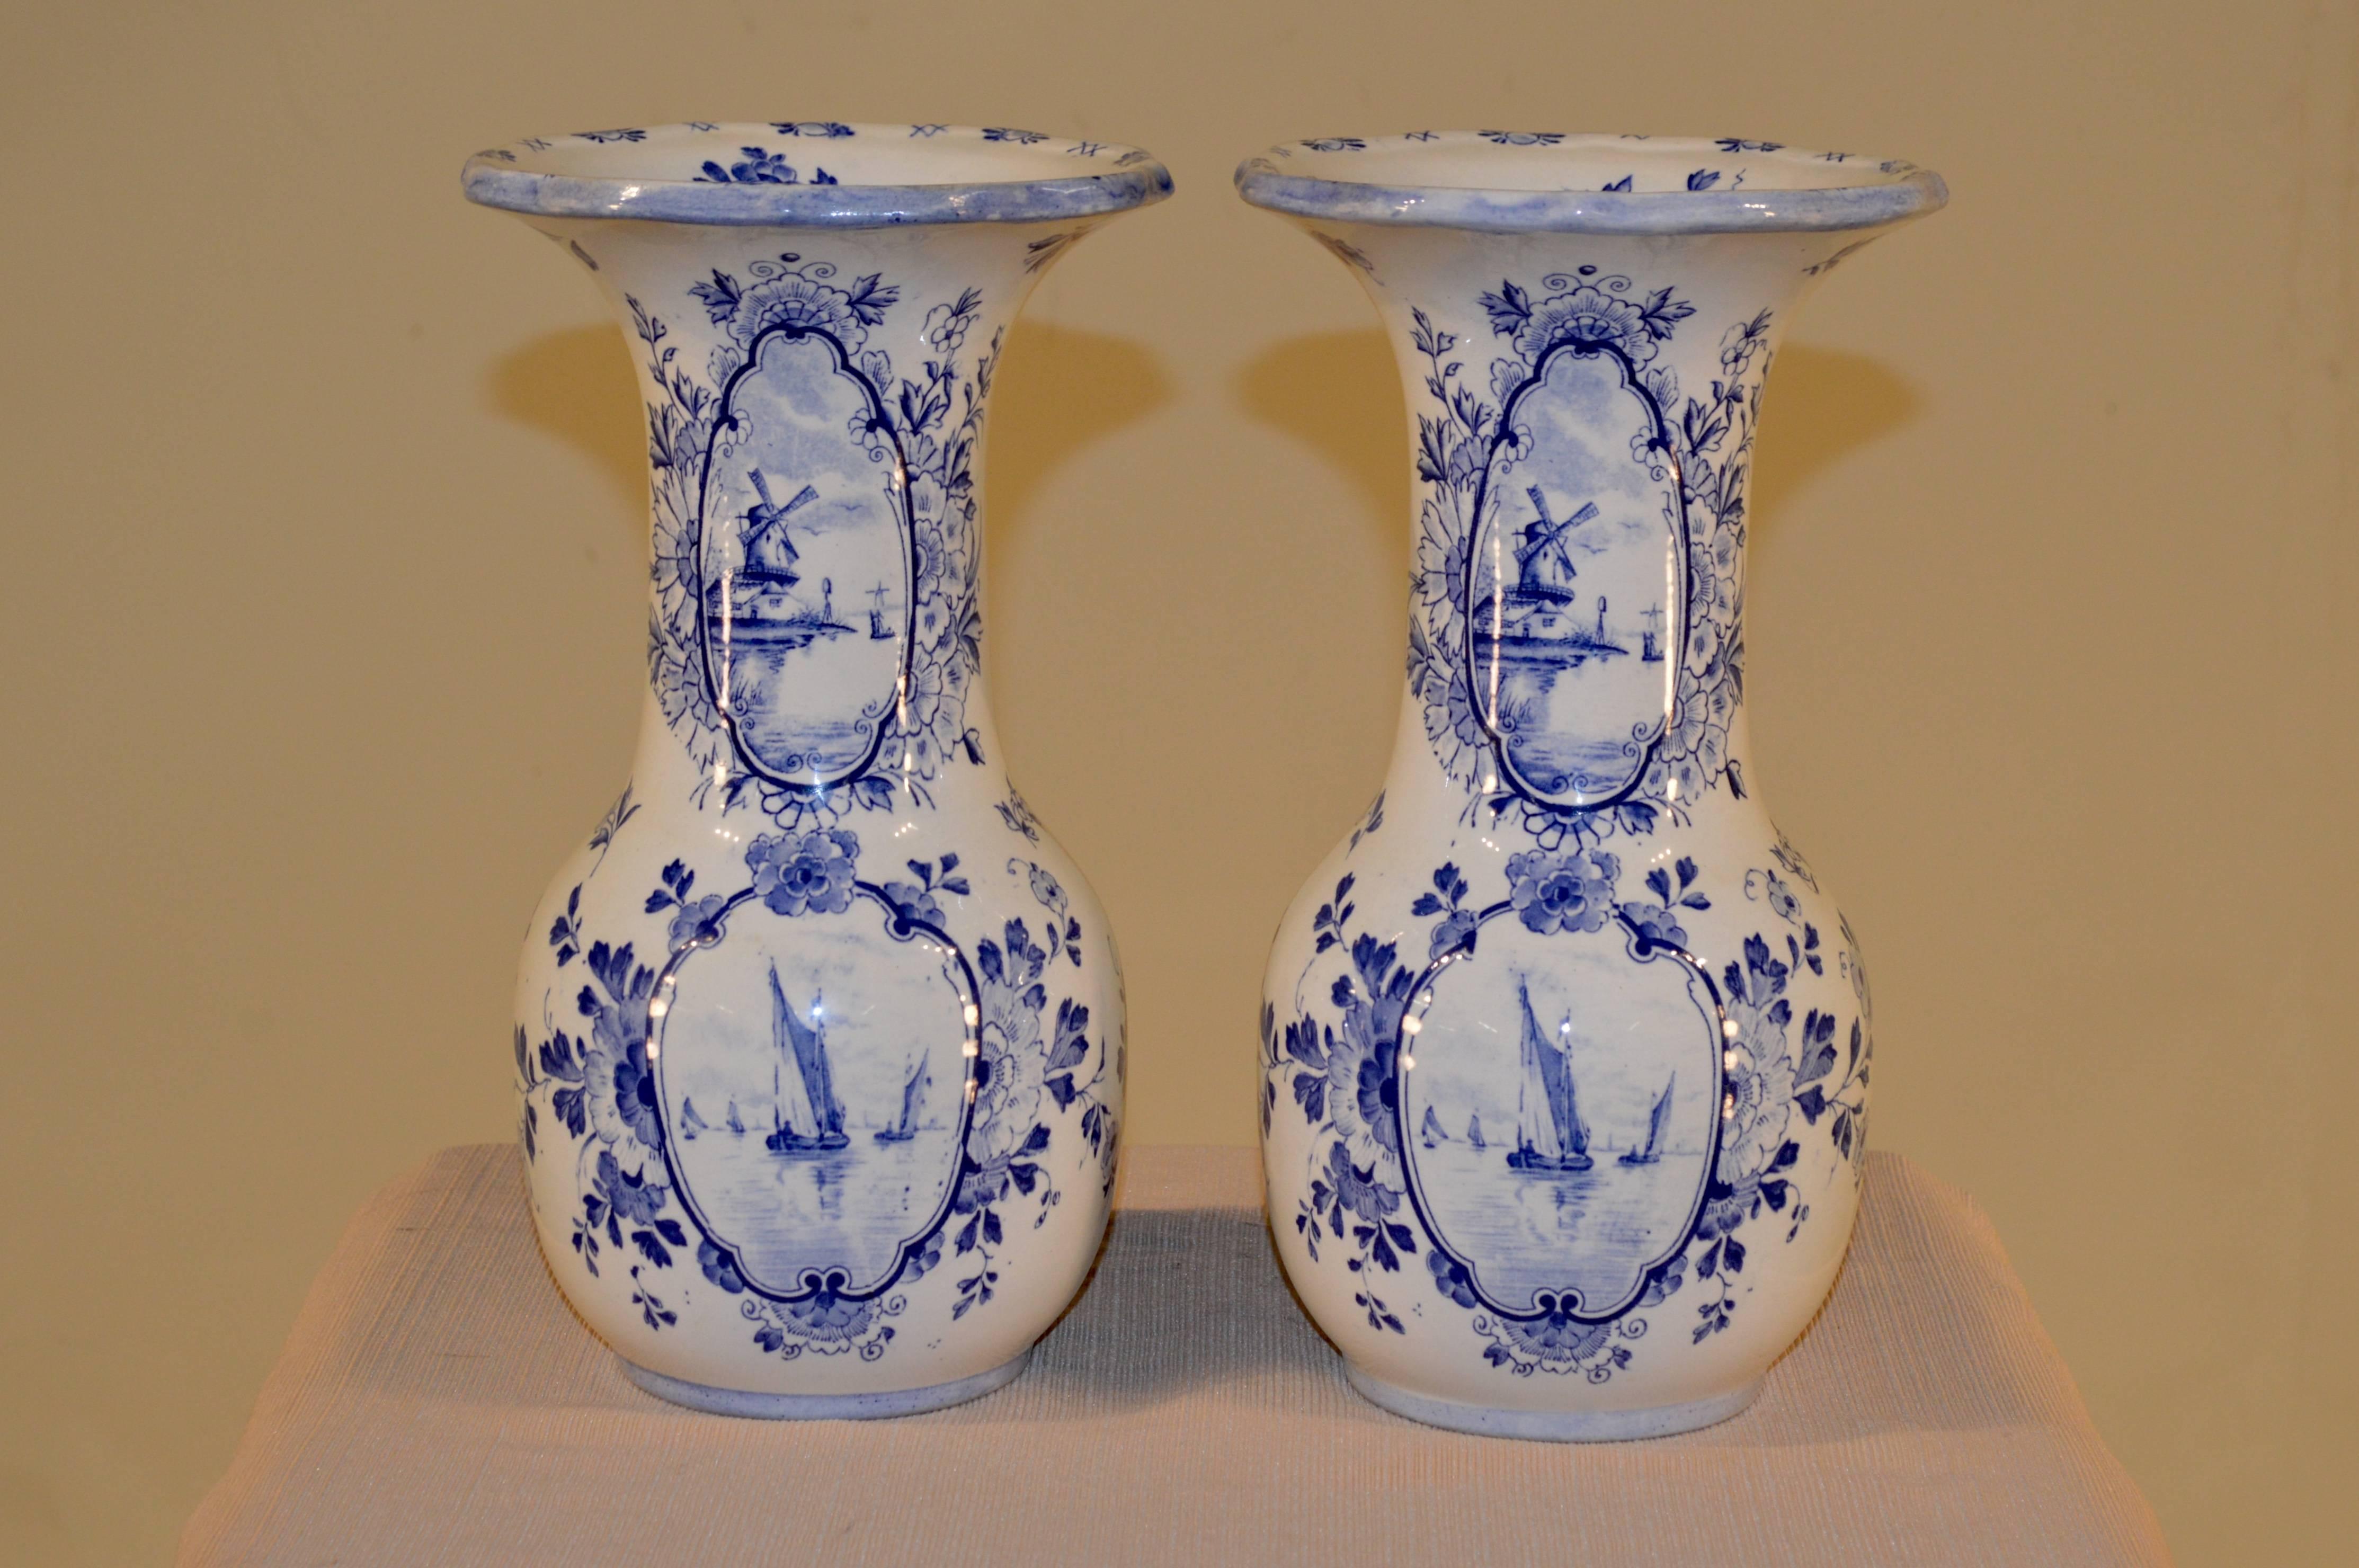 19th century pair of English vases in the delft style of the 18th century. They are distinctively marked on the bottom with an English date lozenge. It is unreadable but that dates it to the third quarter of the 19th century. The vases are